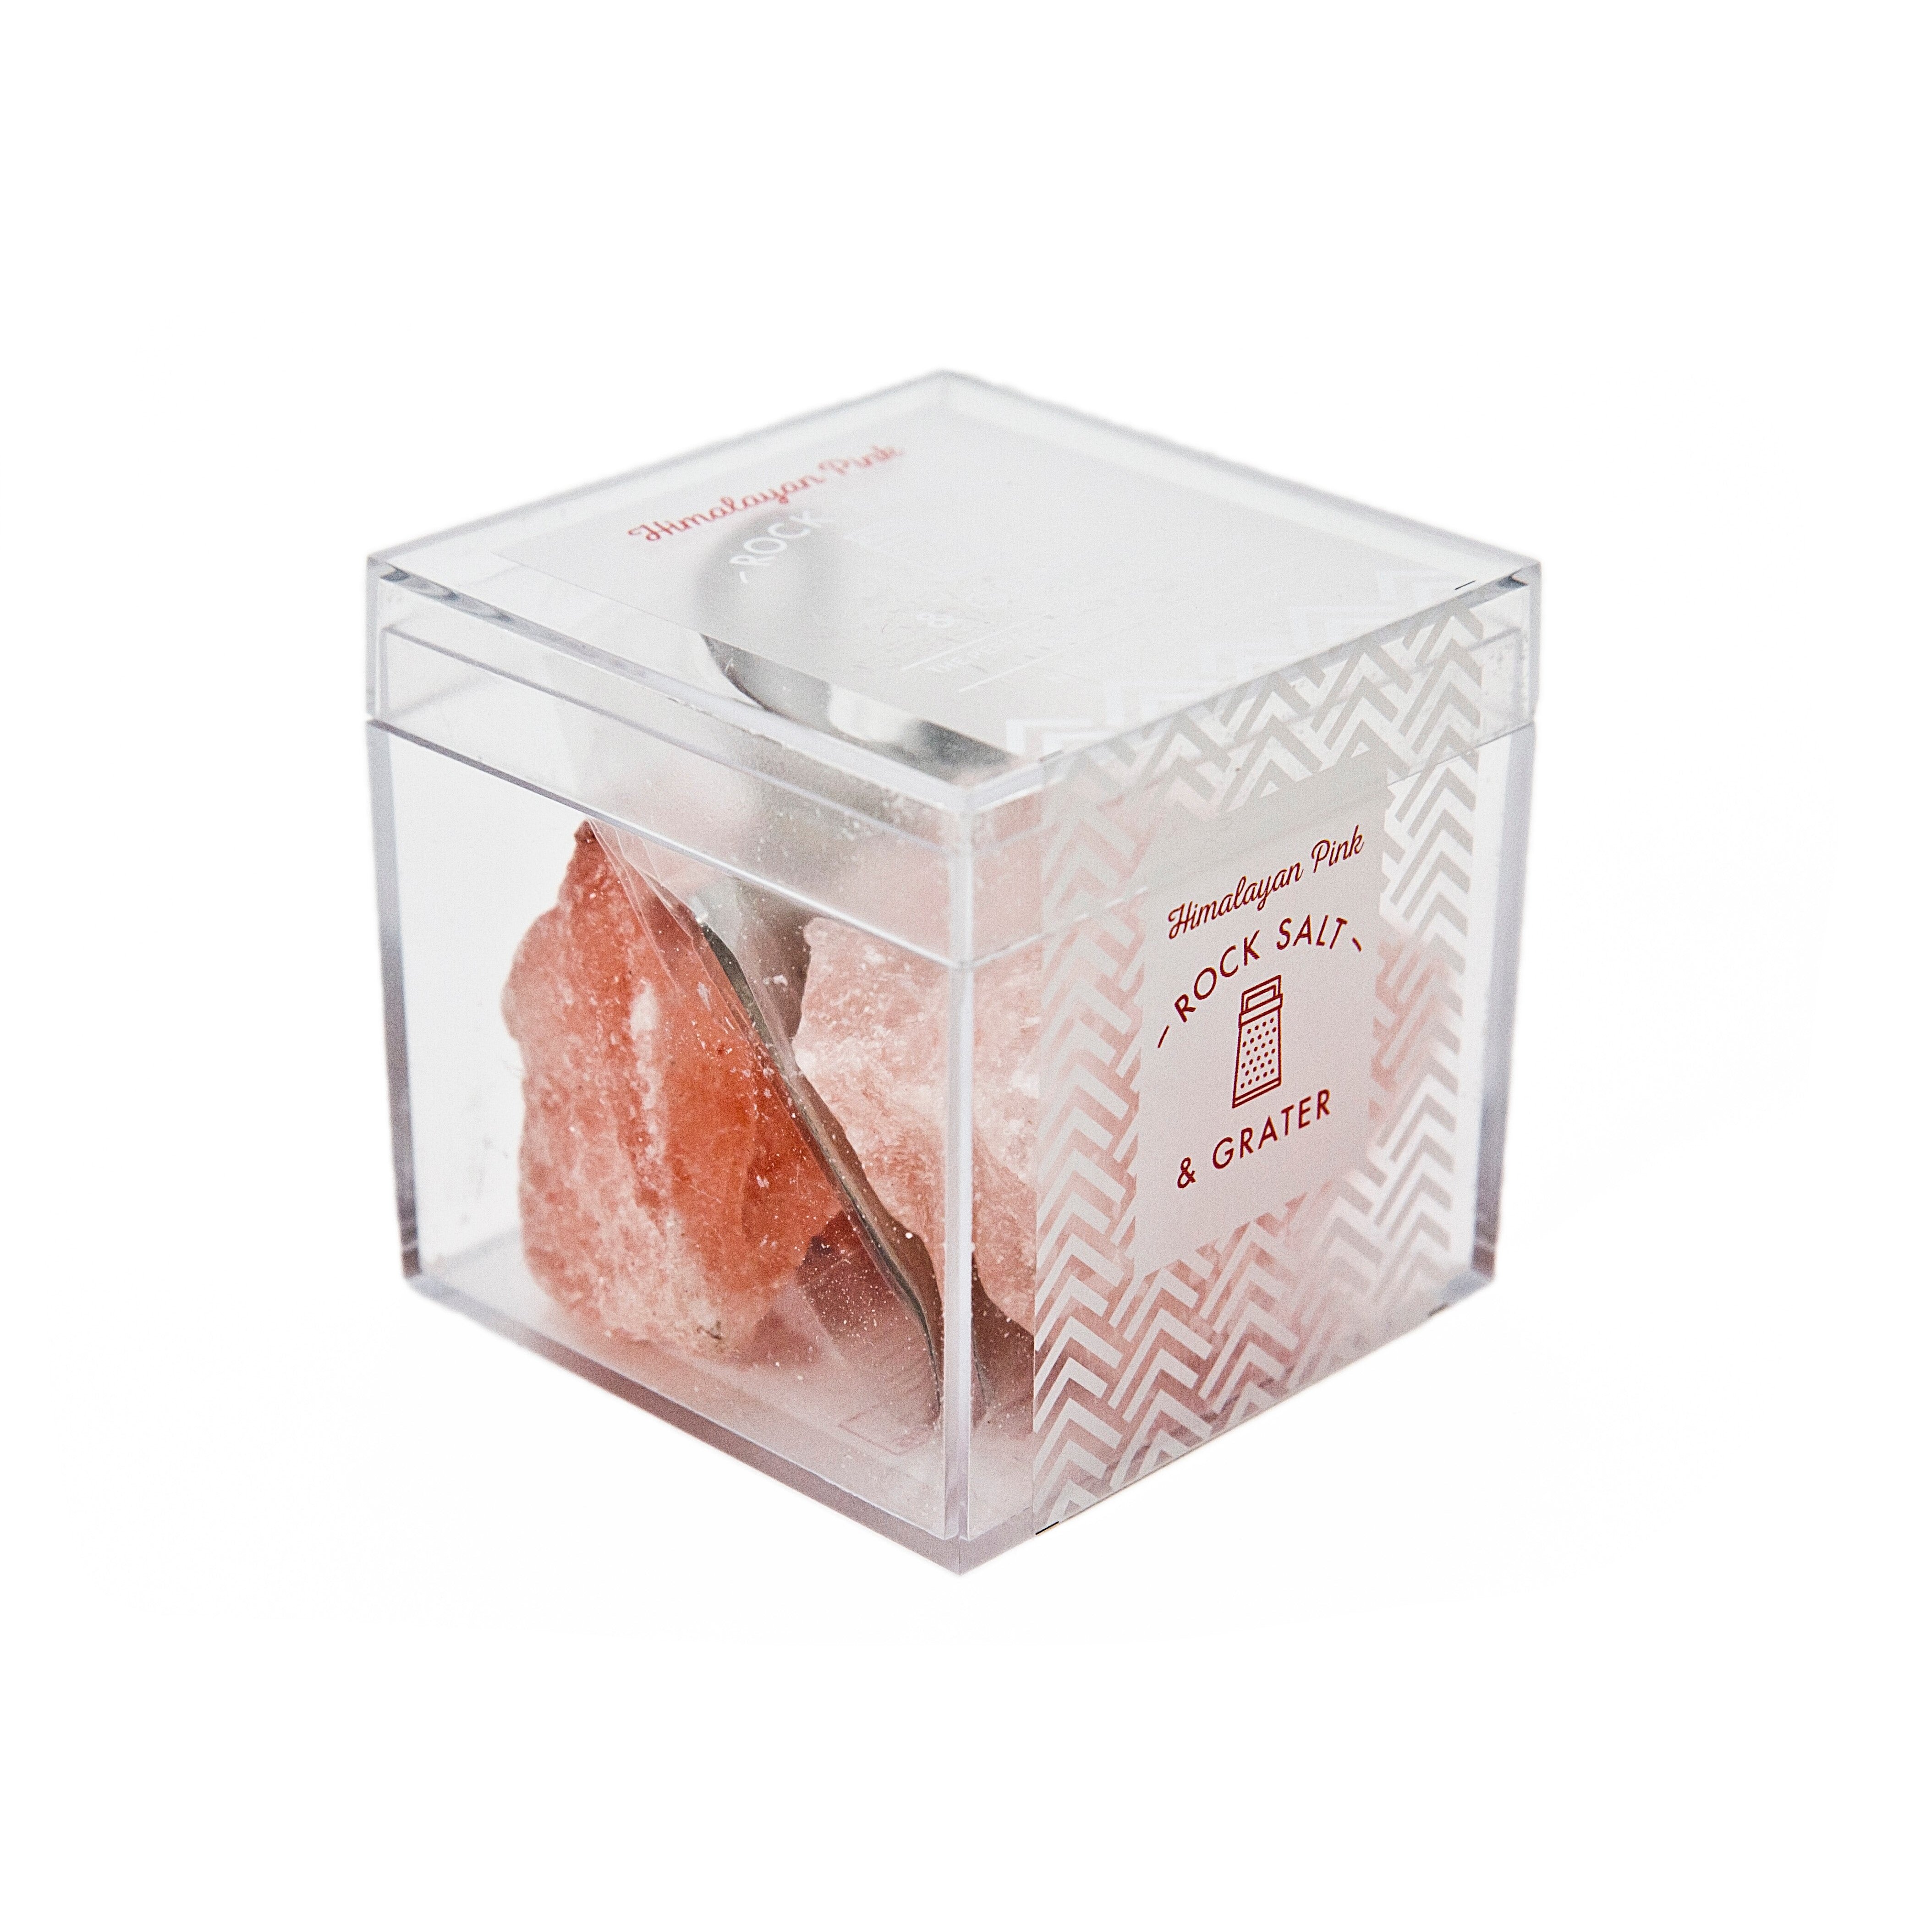 Himalayan Rock Salt and Mini Grater | Quirky Food Gifts by eat.art